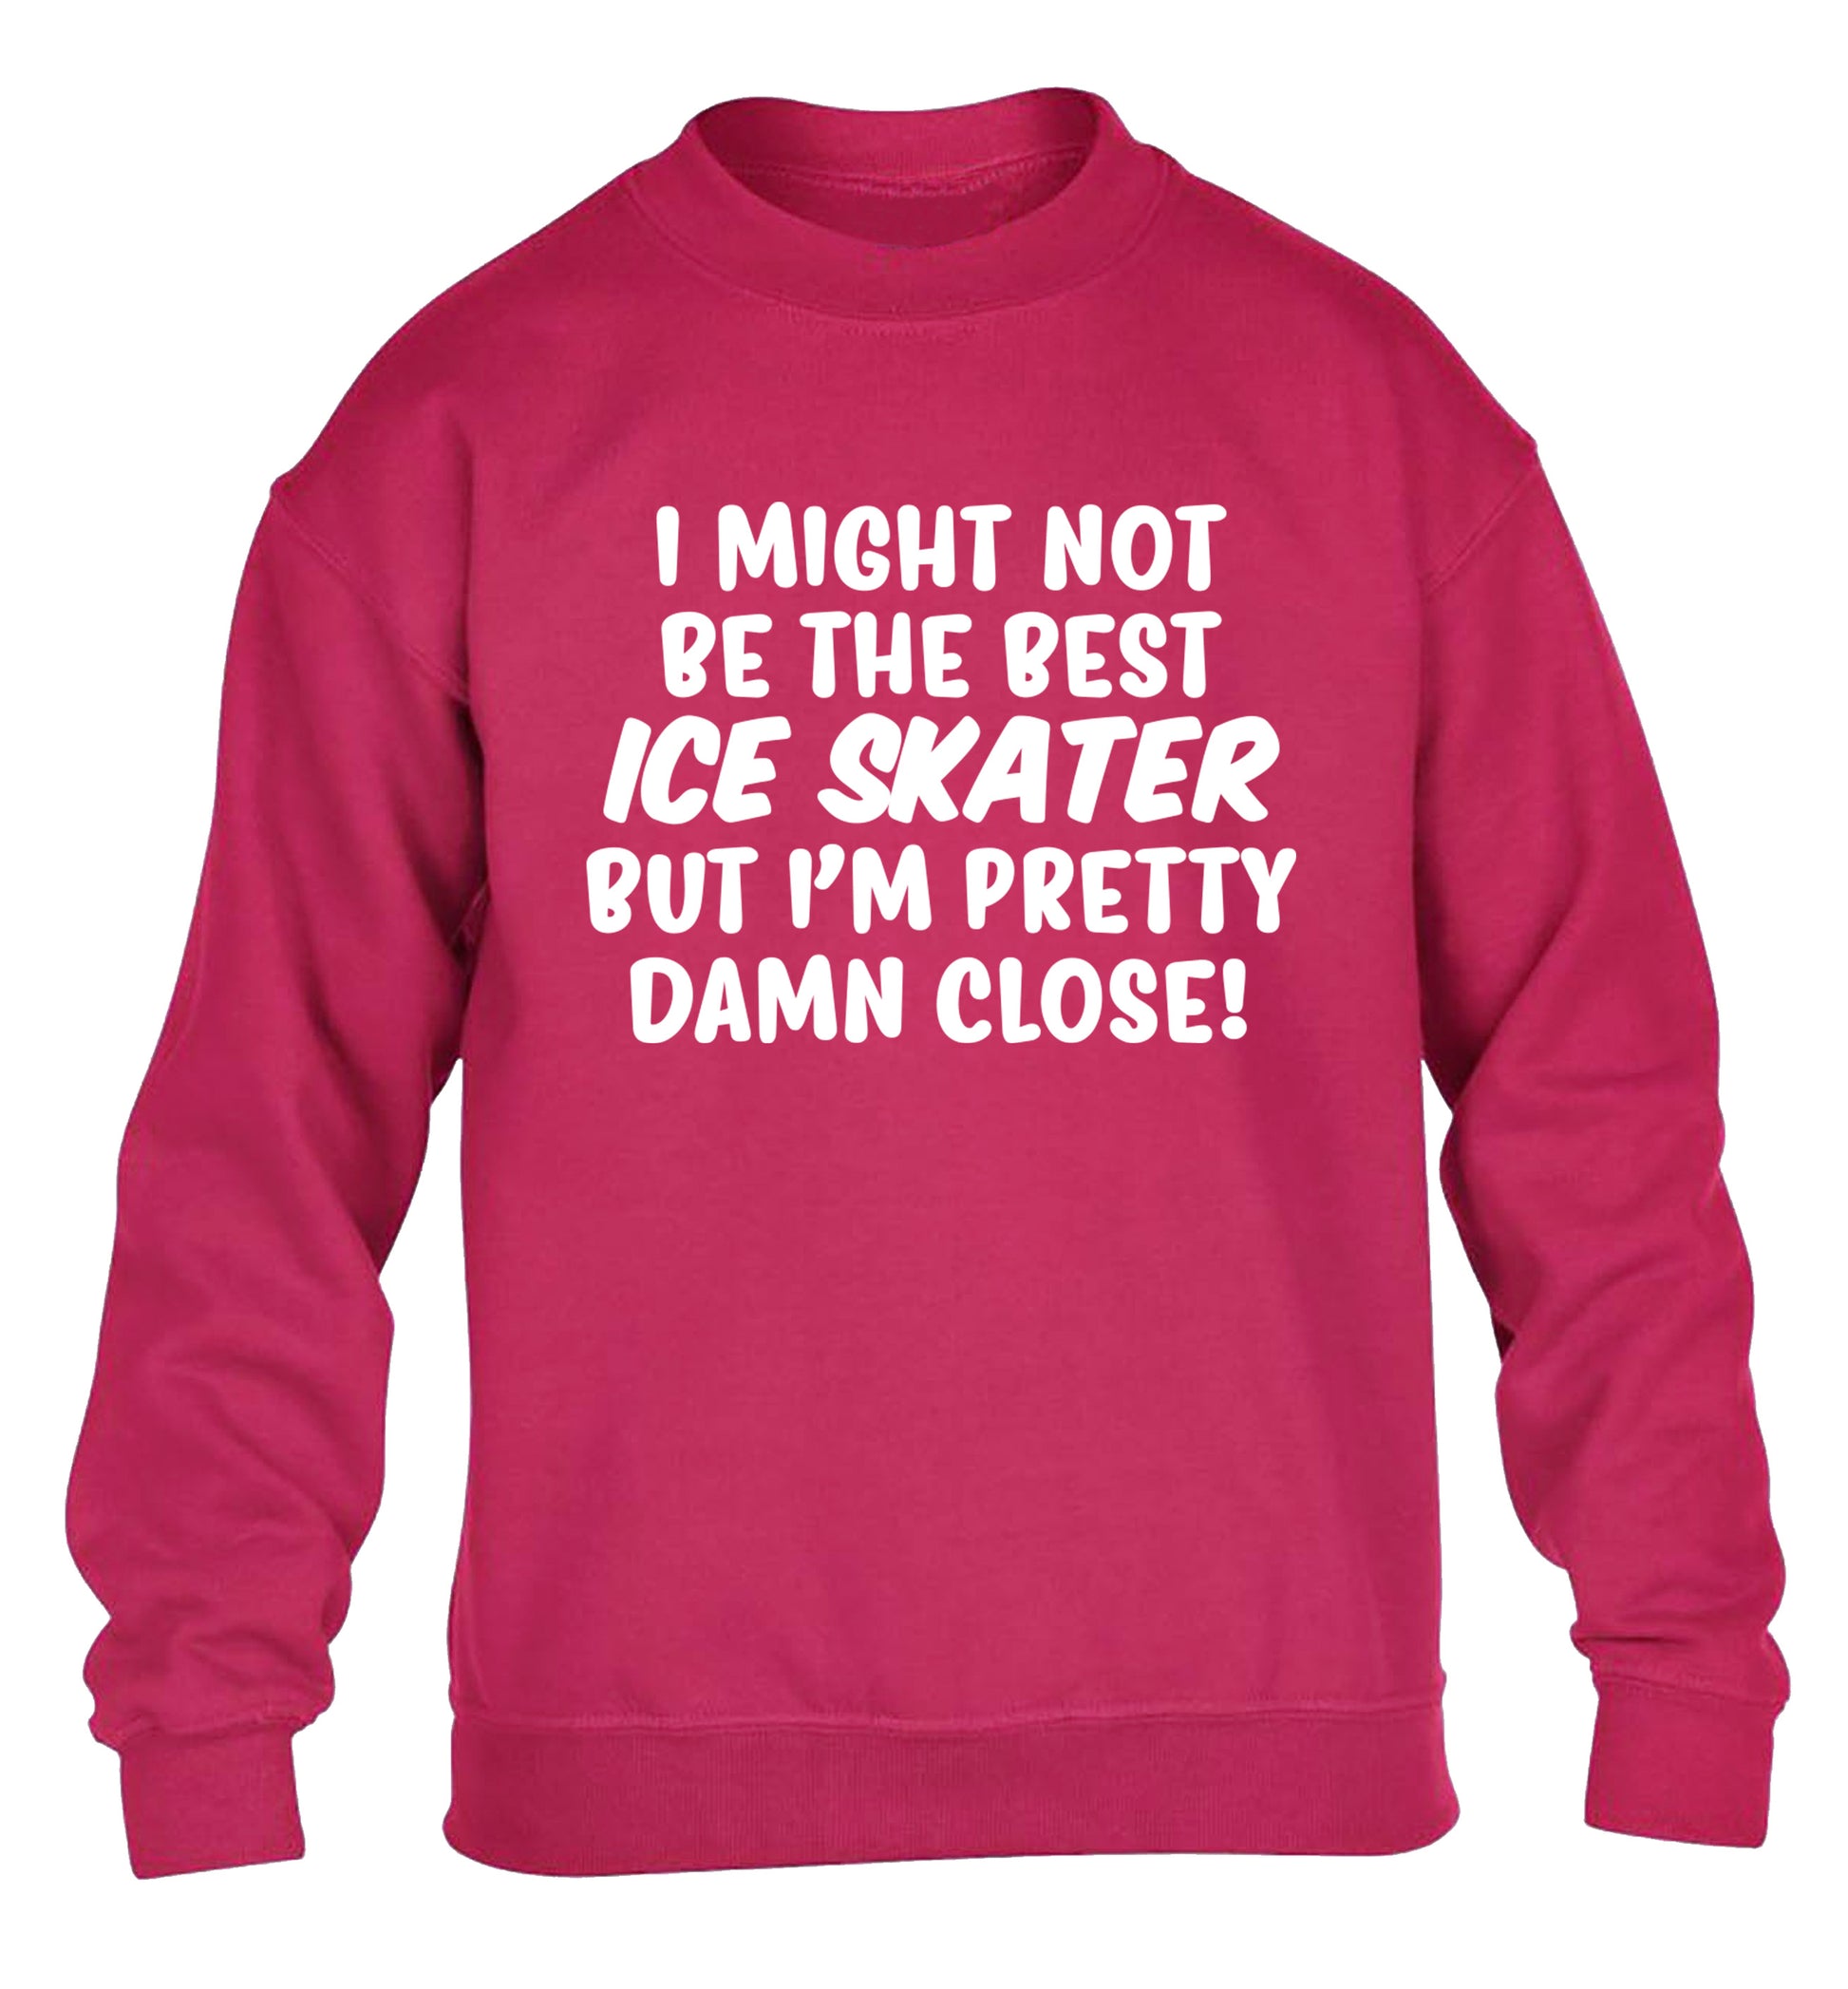 I might not be the best ice skater but I'm pretty damn close! children's pink sweater 12-14 Years